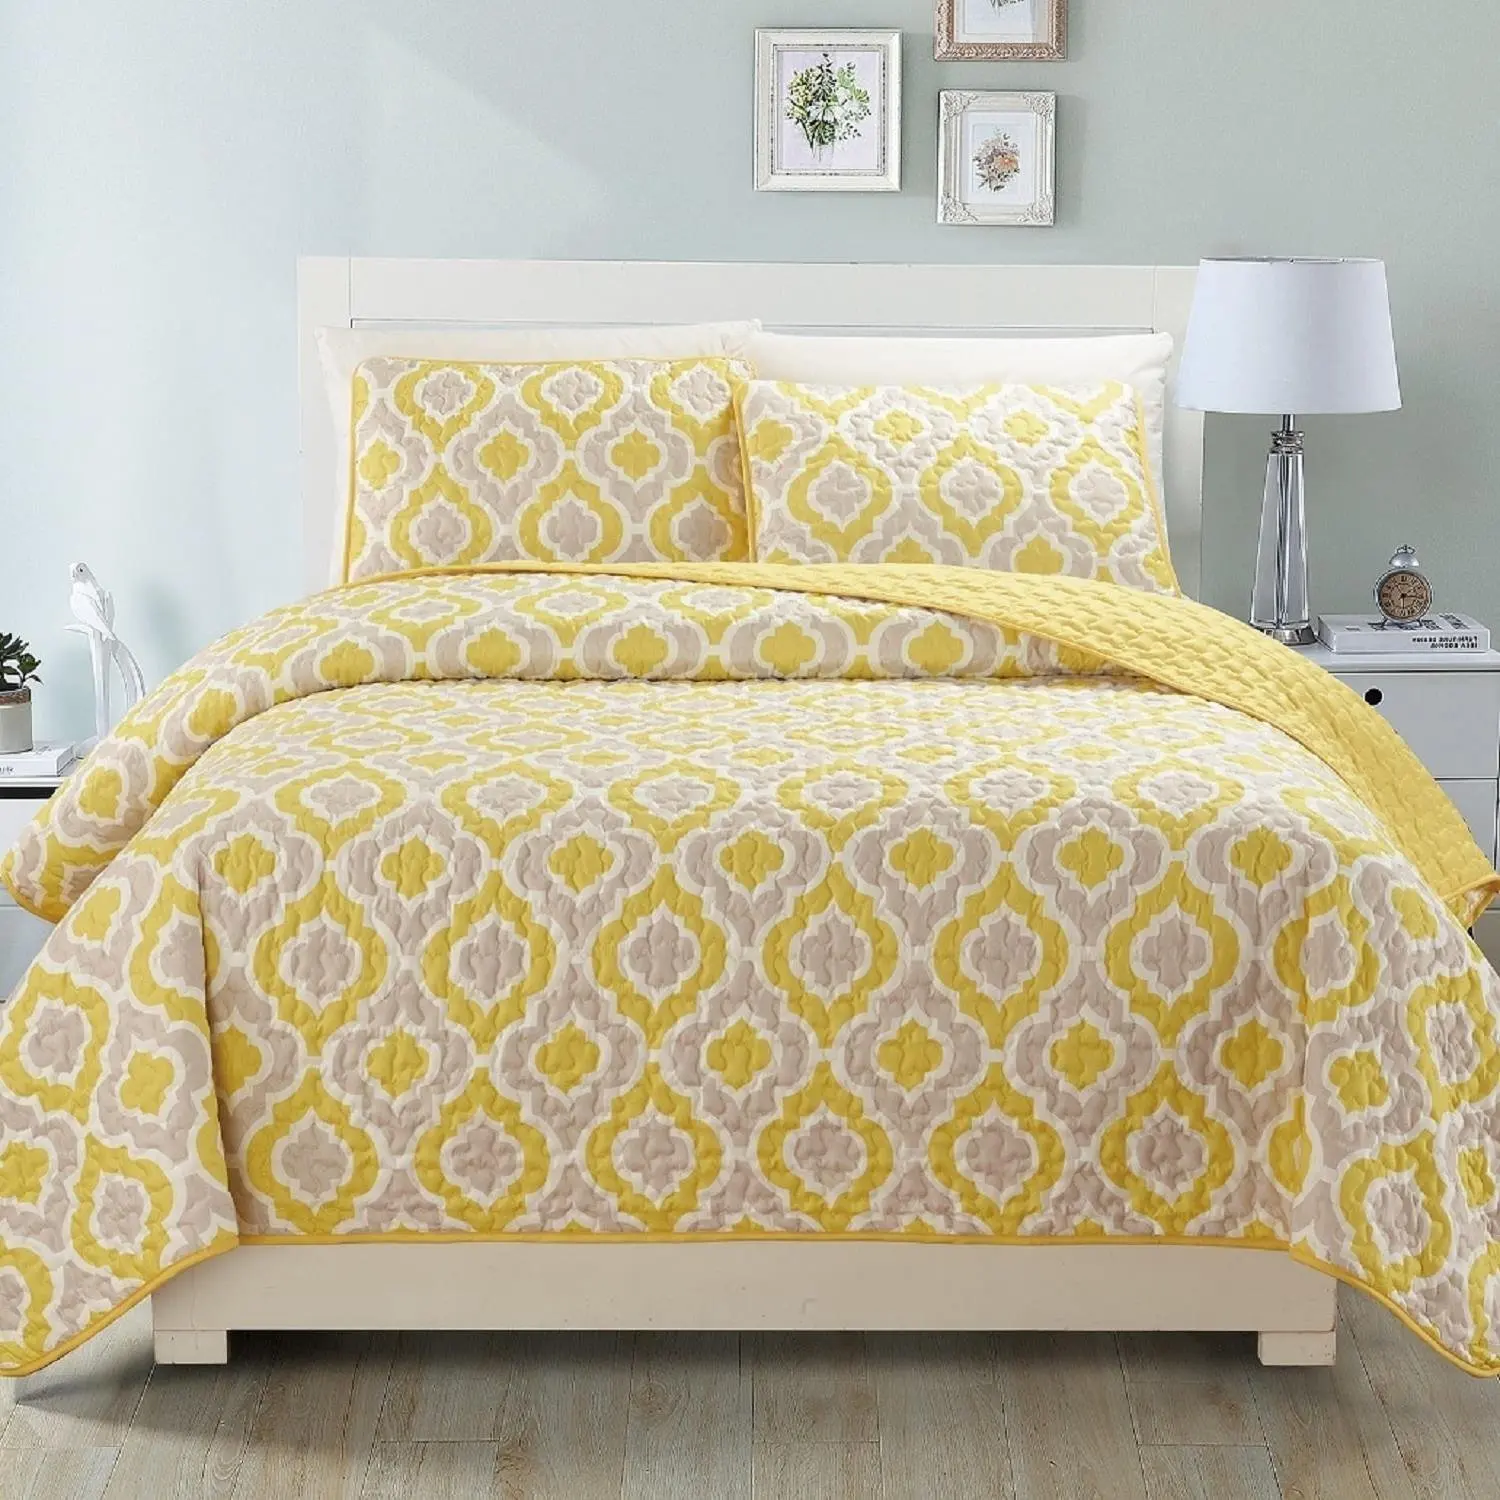 60.99. F&W 3 Piece Beautiful Yellow Taupe White Queen Quilt Set, Diamon...